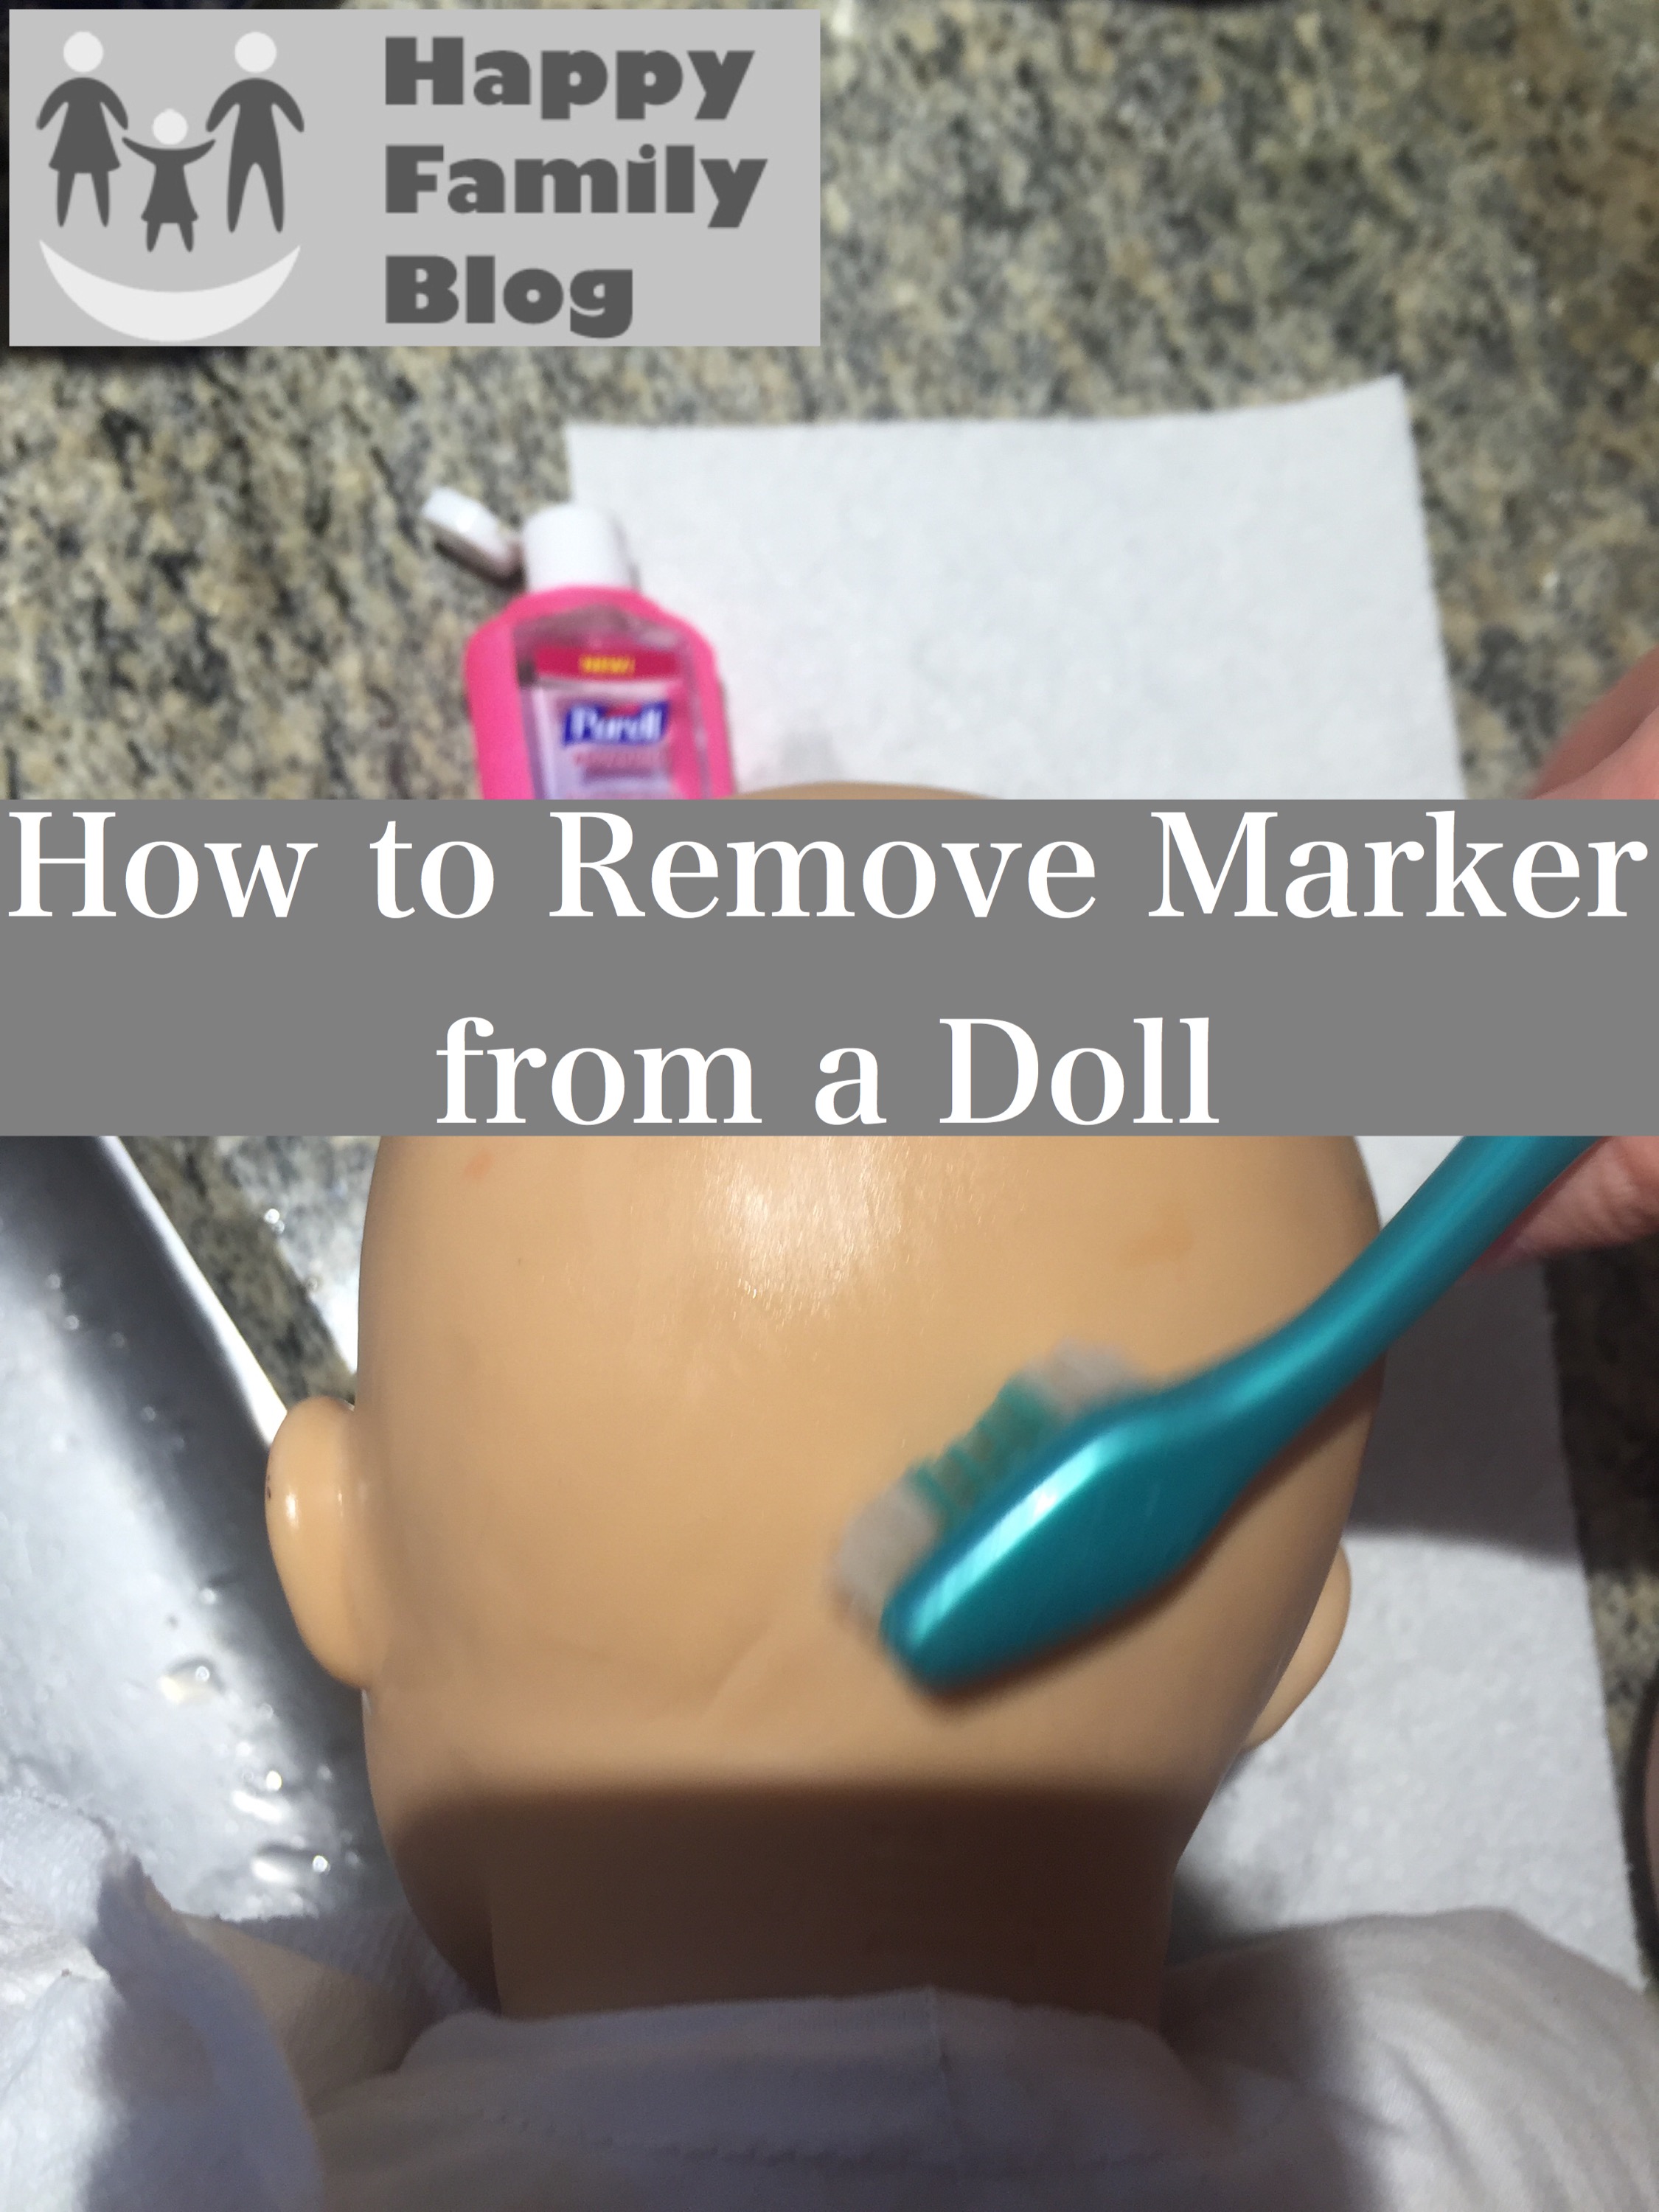 How to Remove Marker from a Doll; Happy Family Blog Cleaning Toys, Cleaning Dolls, Removing Marker